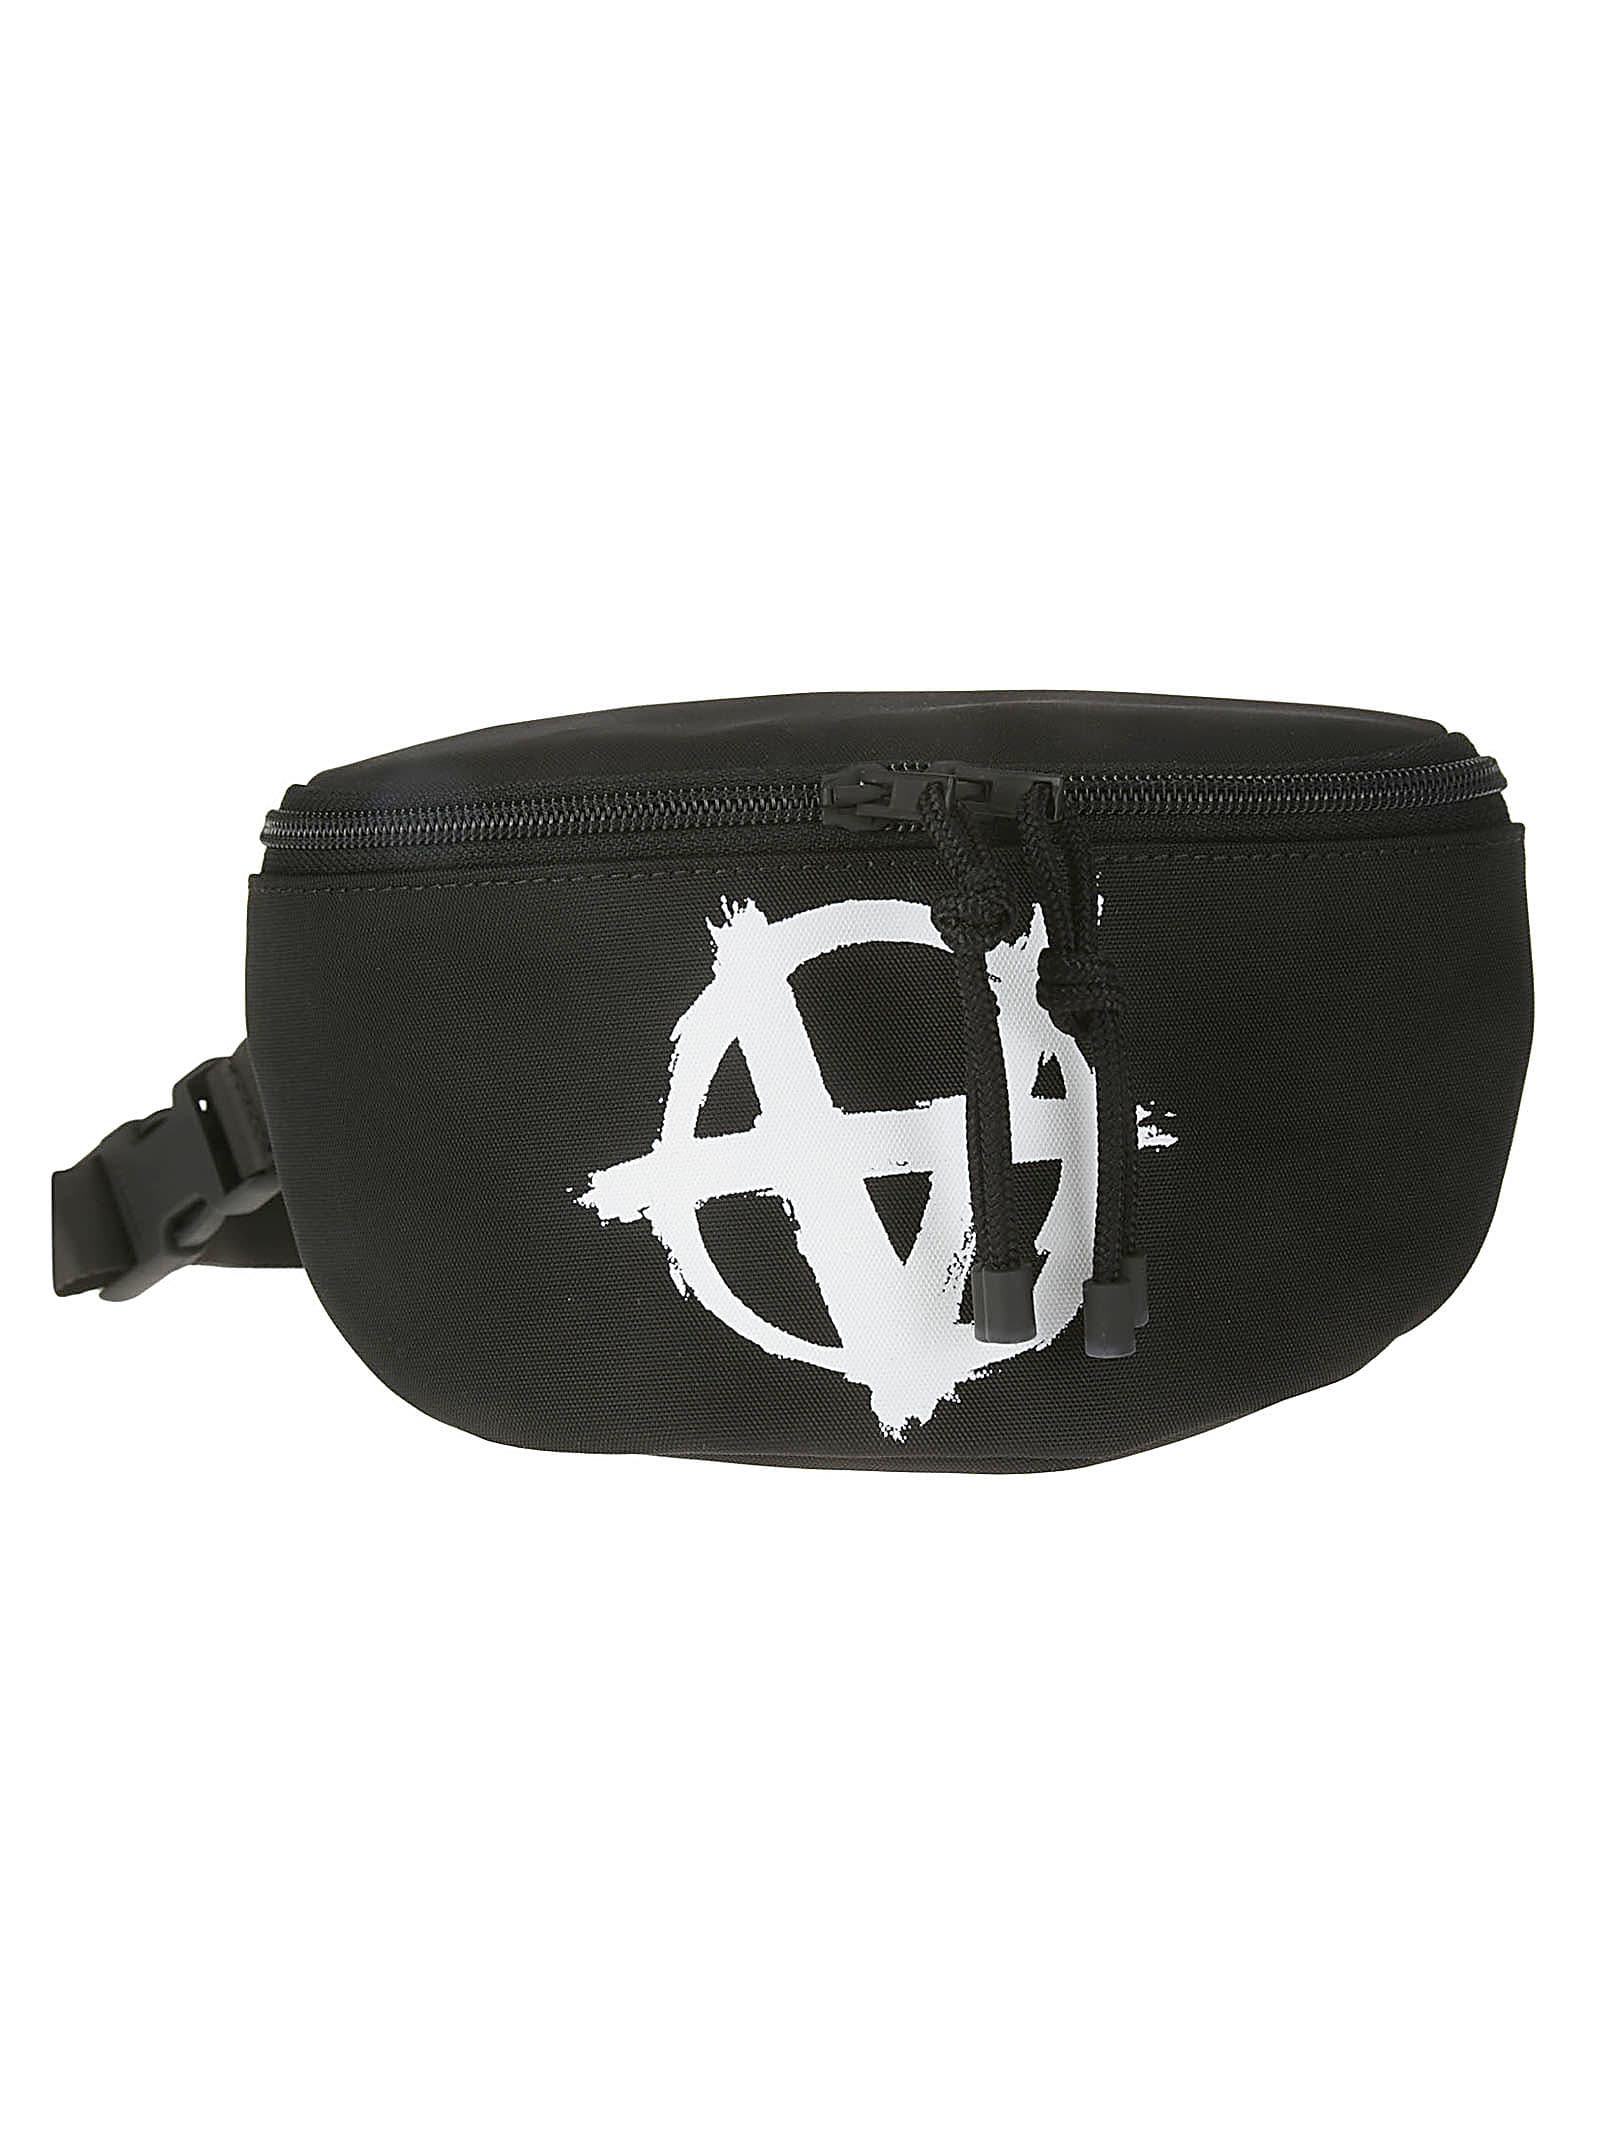 Vetements Anarchy Fanny Pack In Black